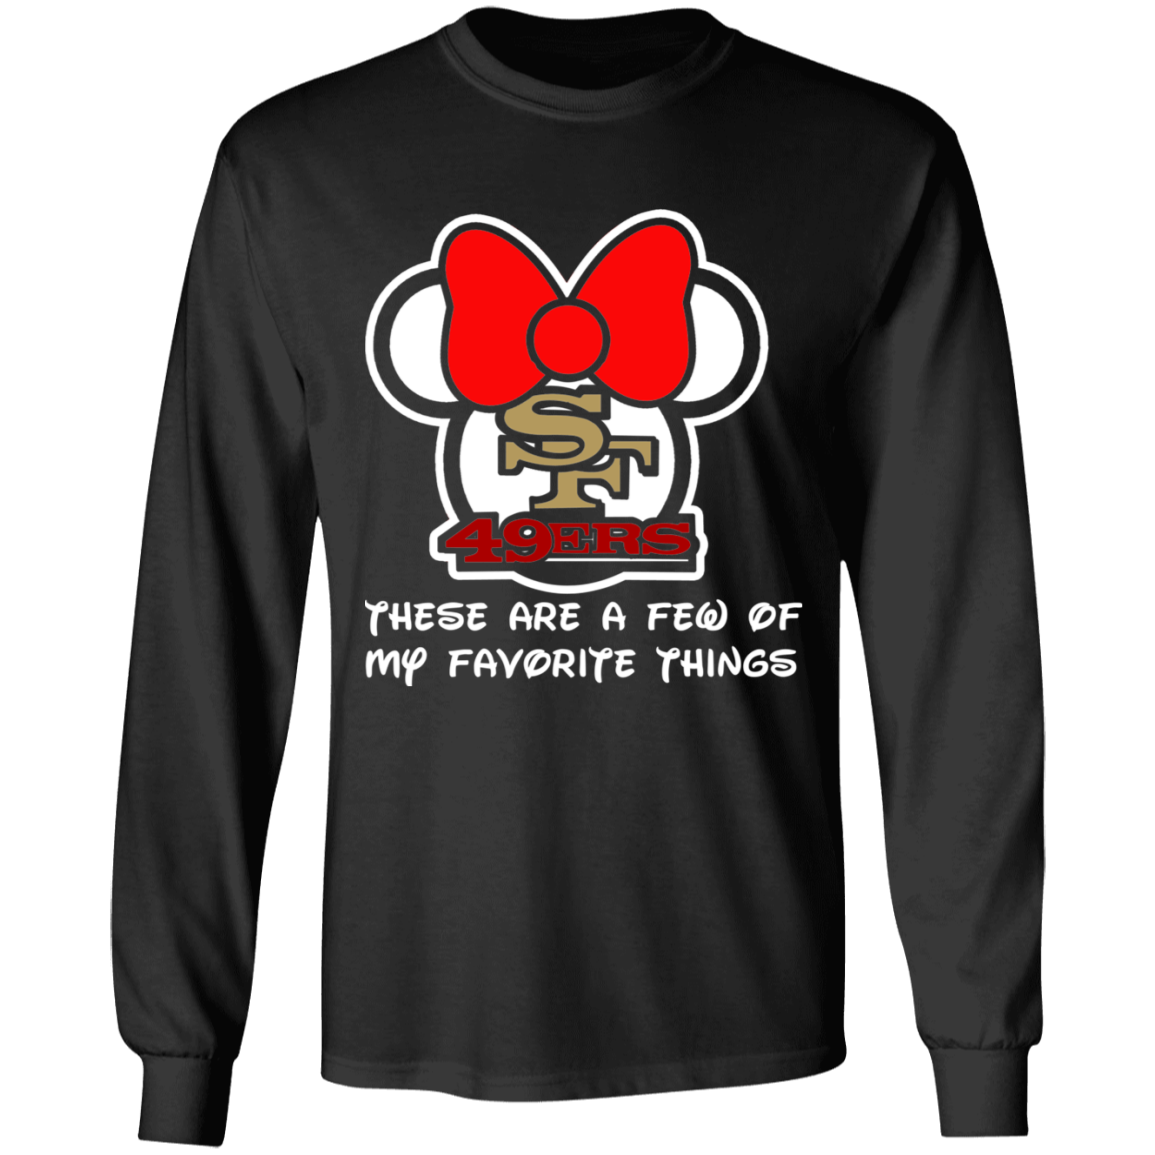 ArtichokeUSA Custom Design #51. These are a few of my favorite things. SF 49ers/Hello Kitty/Mickey Mouse Fan Art. Long Sleeve T-Shirt